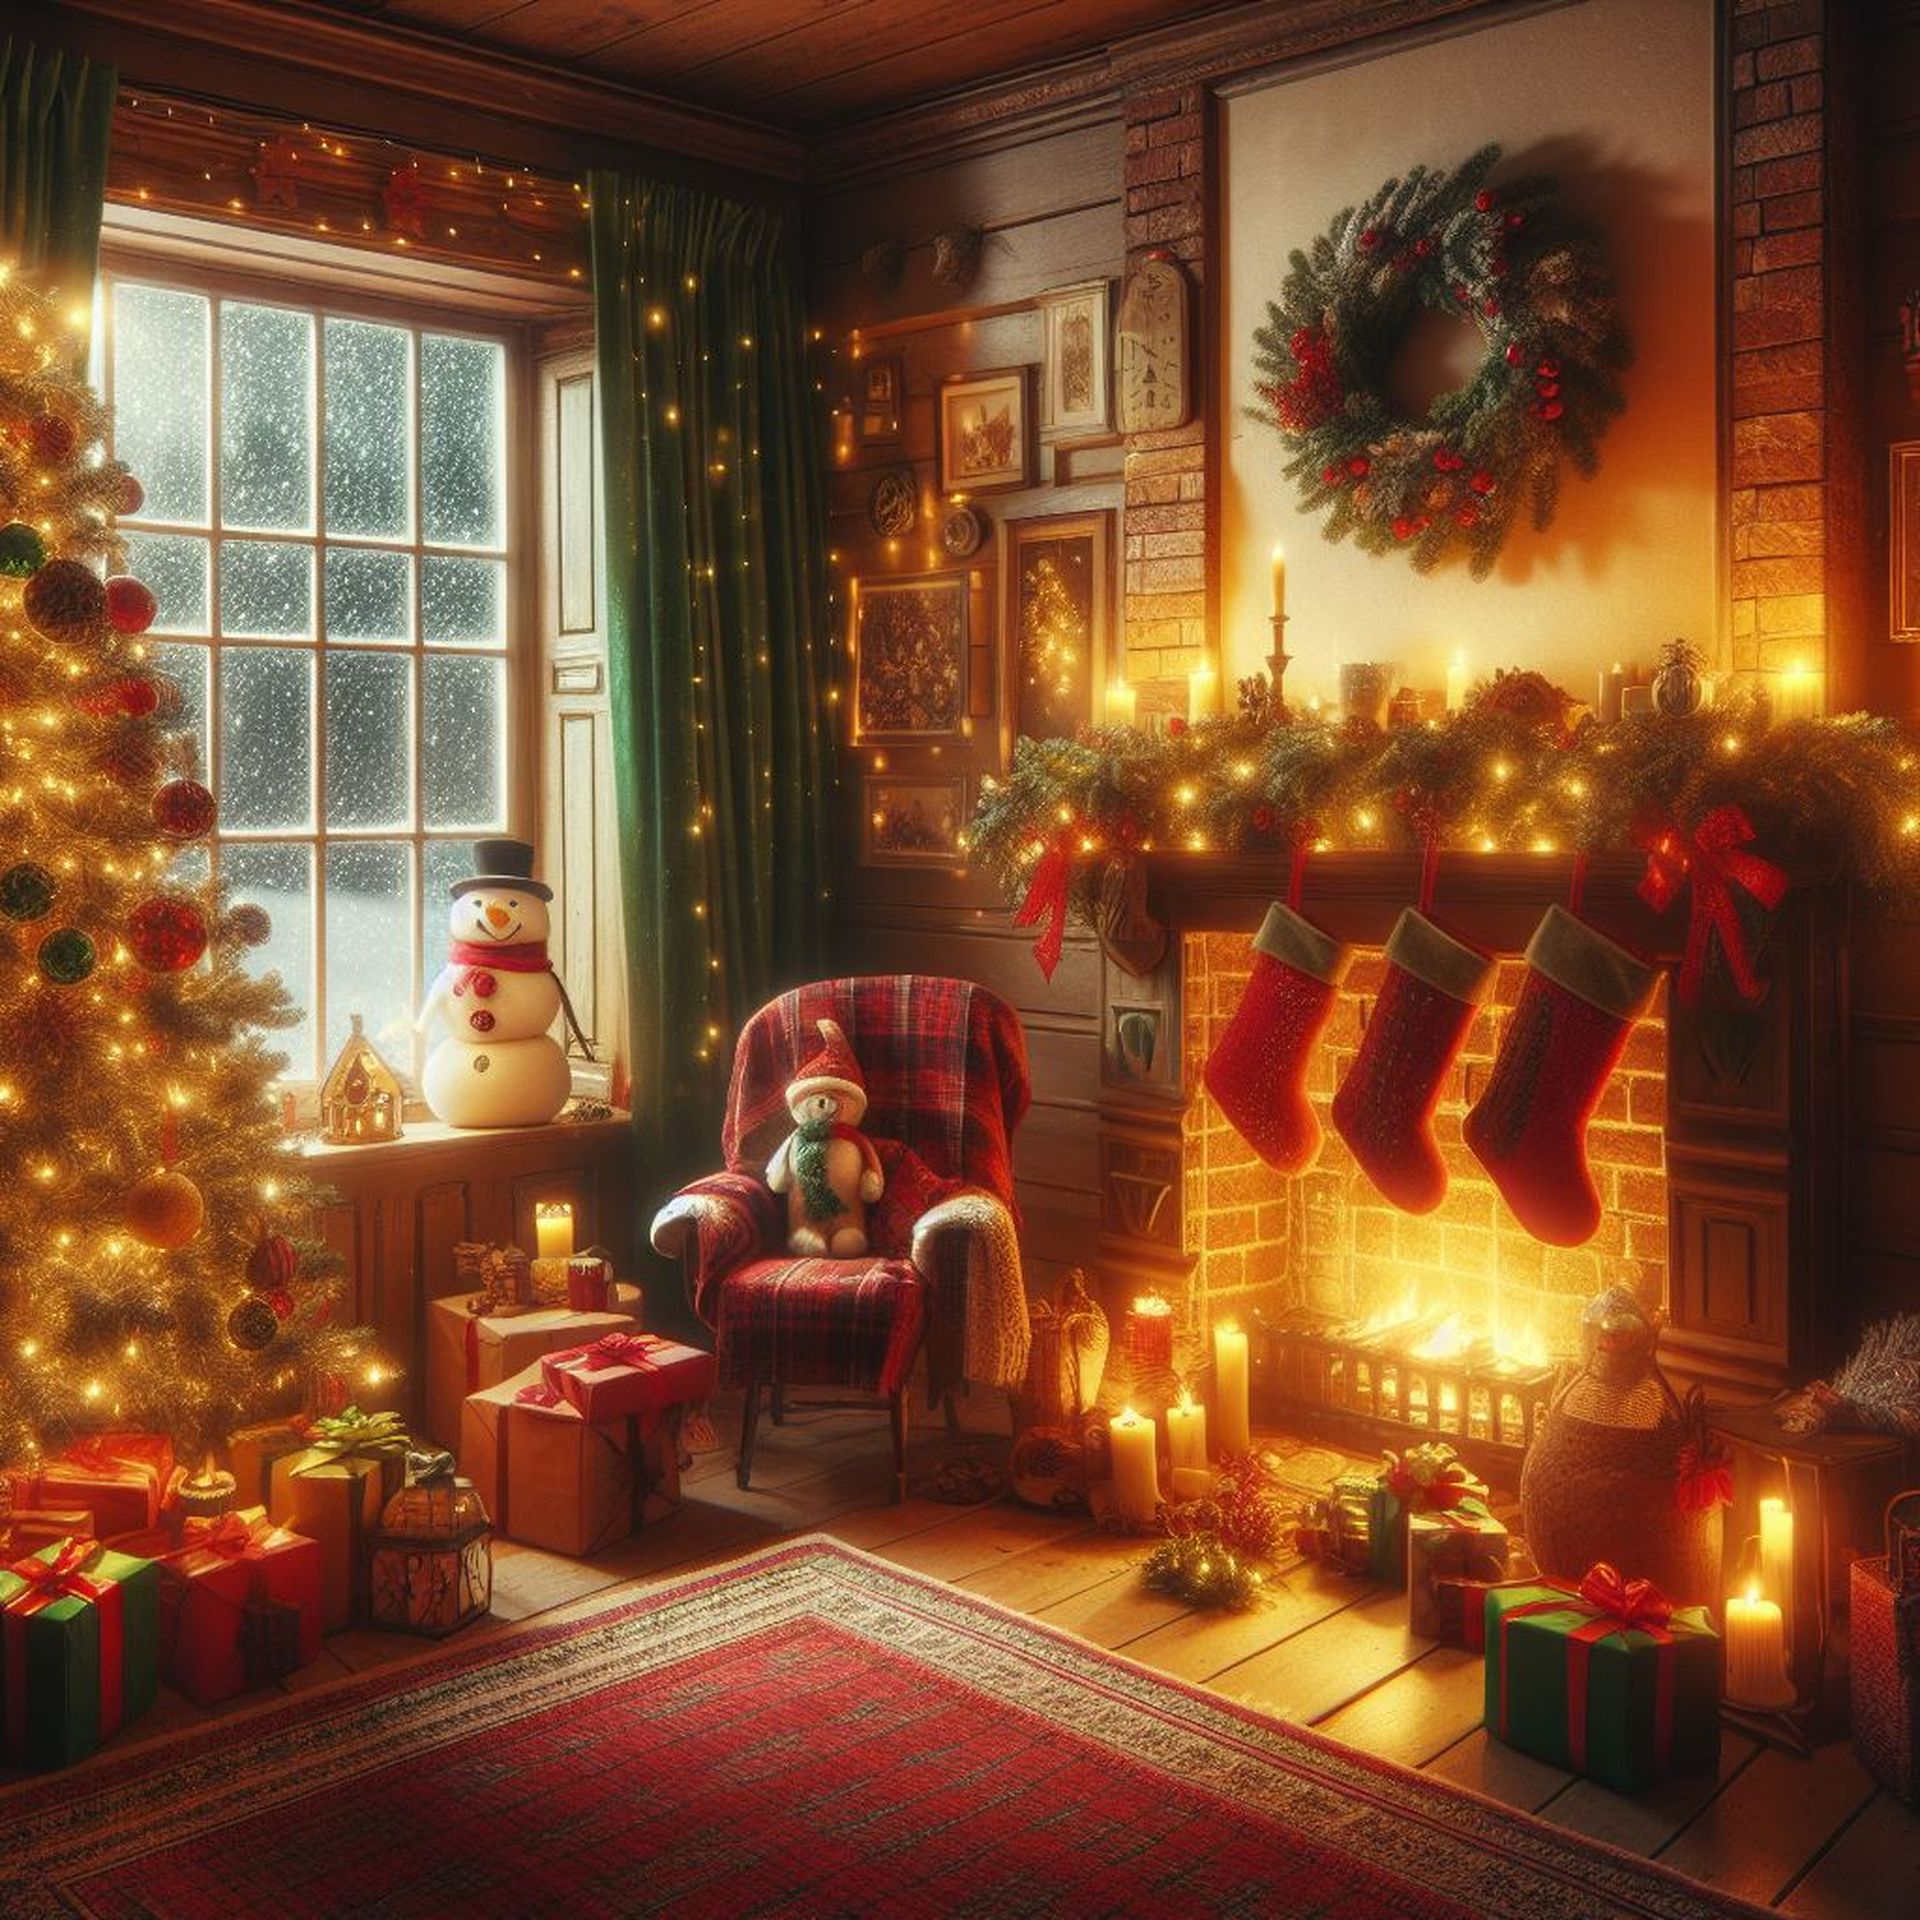 Best AI Christmas Photo generators: Upgrade your holiday photos with AI artistry with DALL-E, Midjourney, Photoshop AI, and more